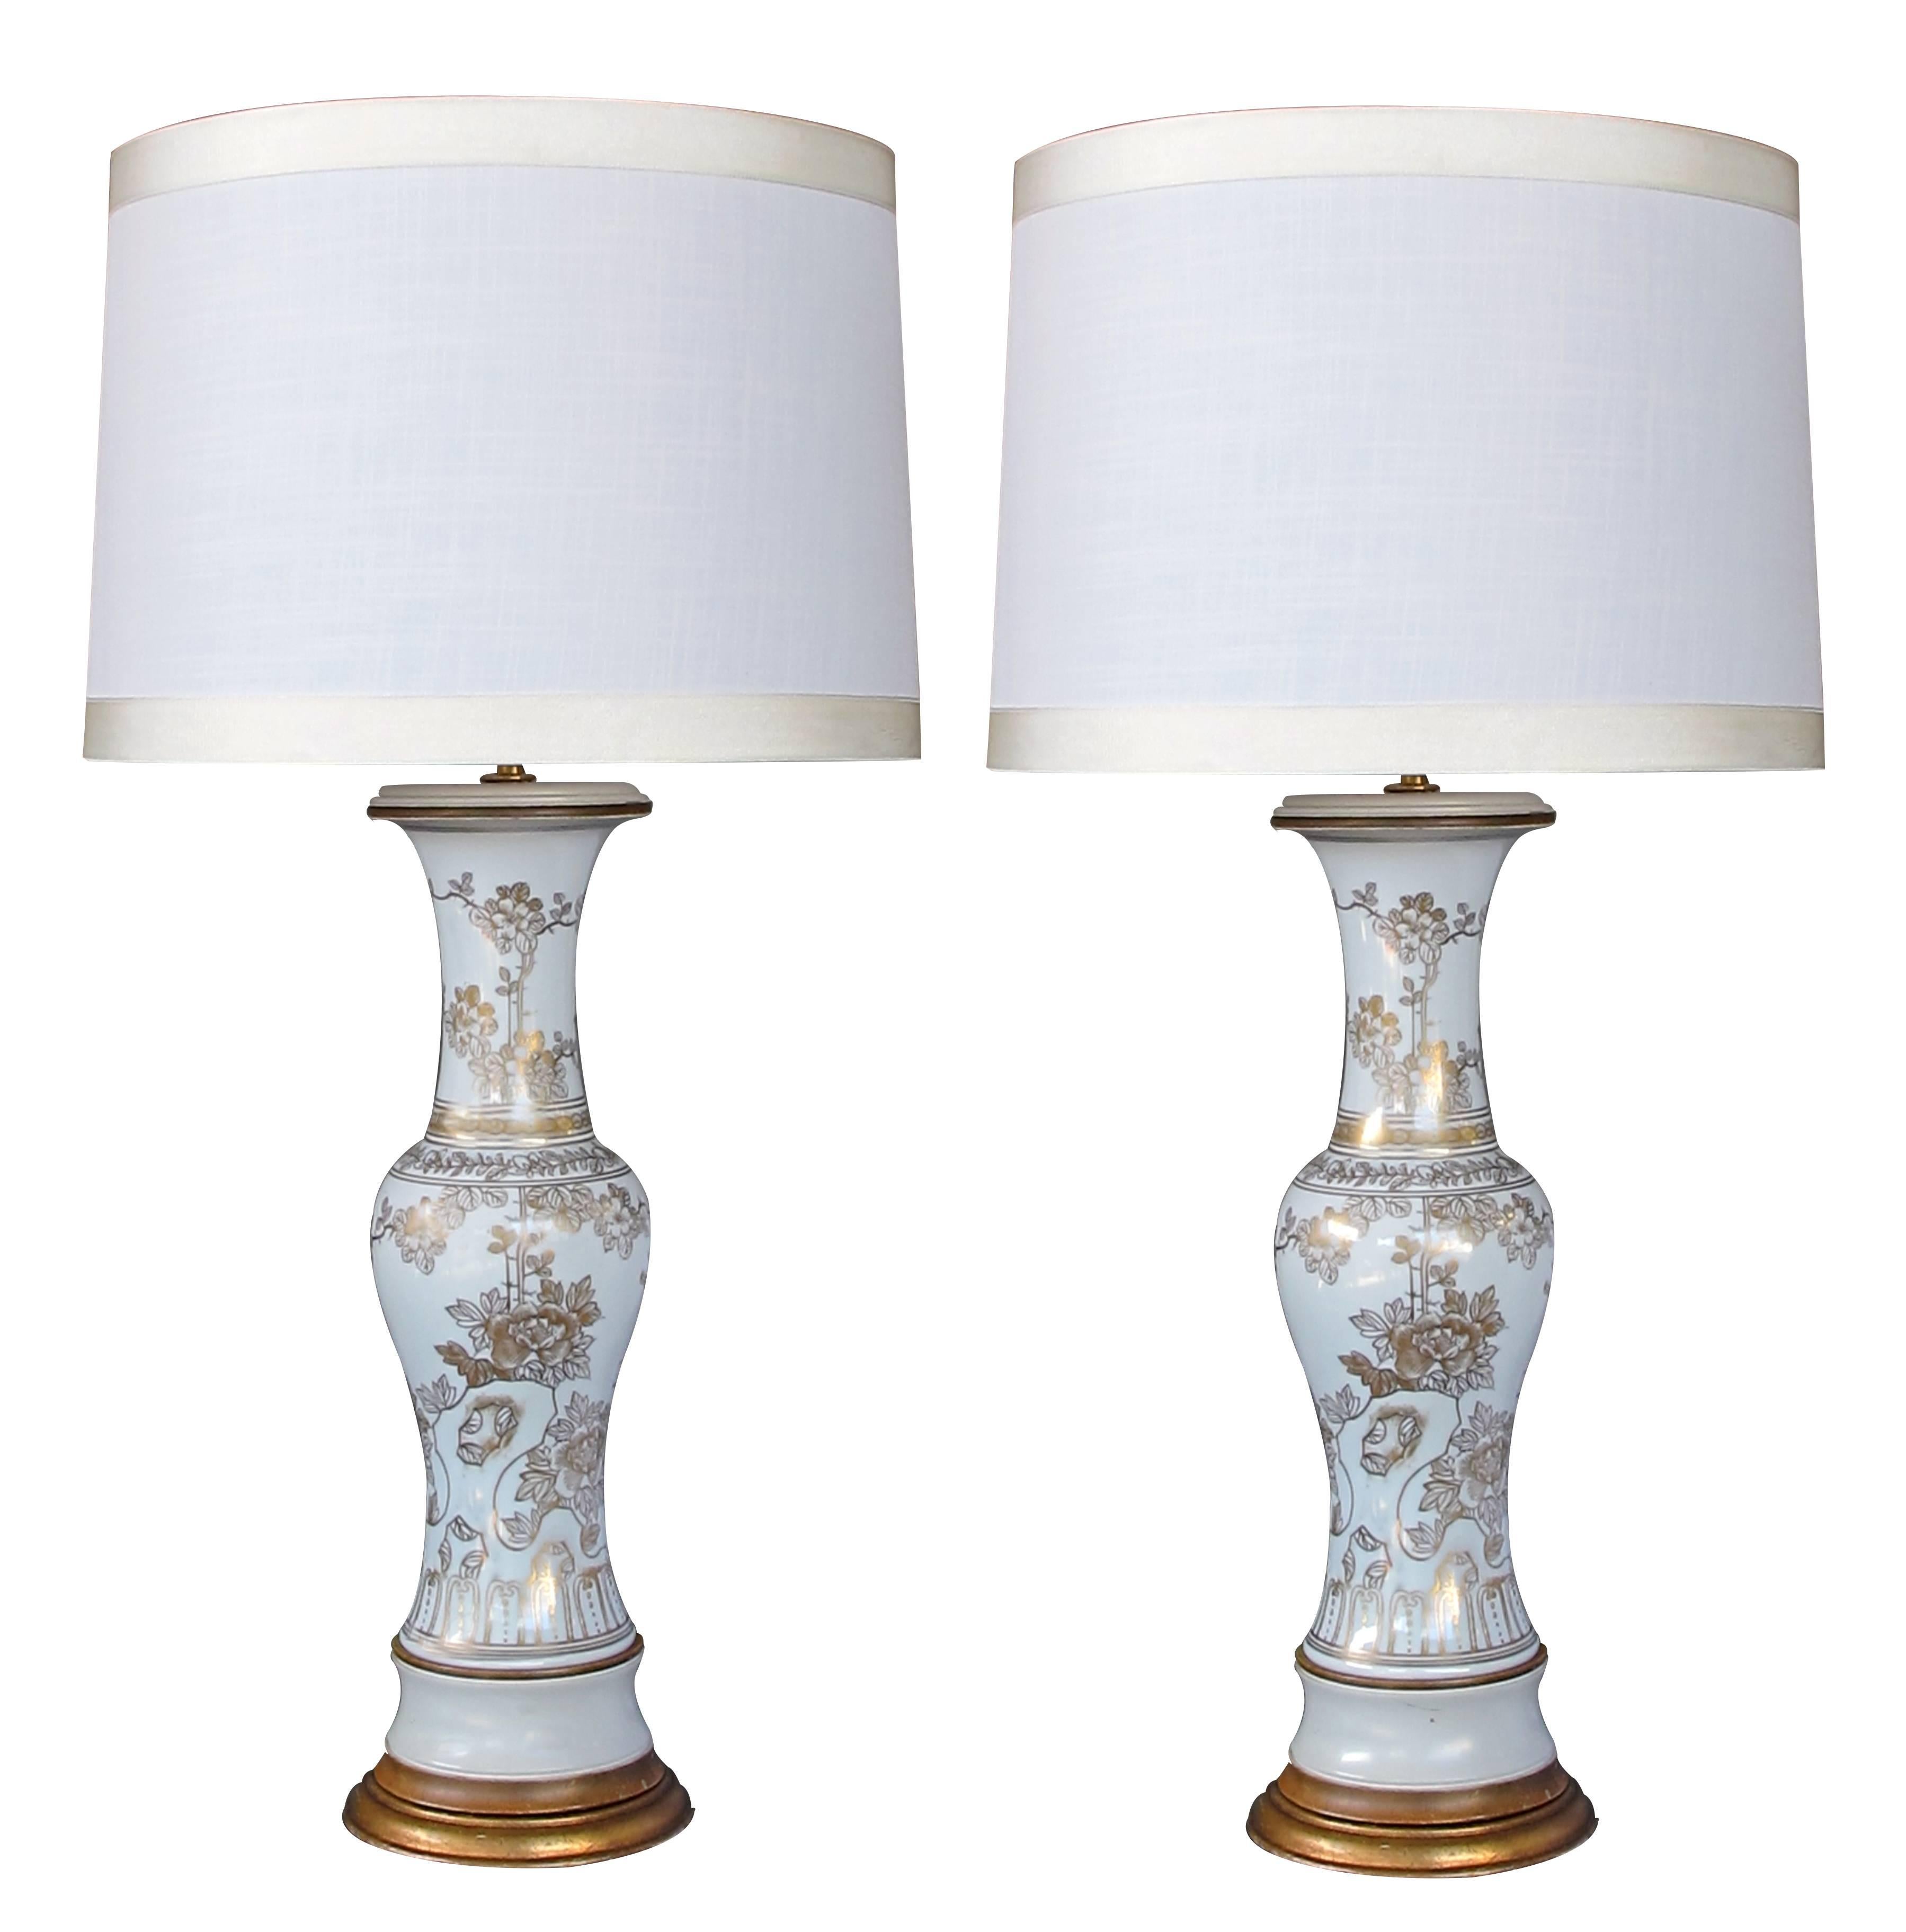 Elegant Pair of 19th Century Chinese Baluster-Form Porcelain Vases Now Lamps For Sale